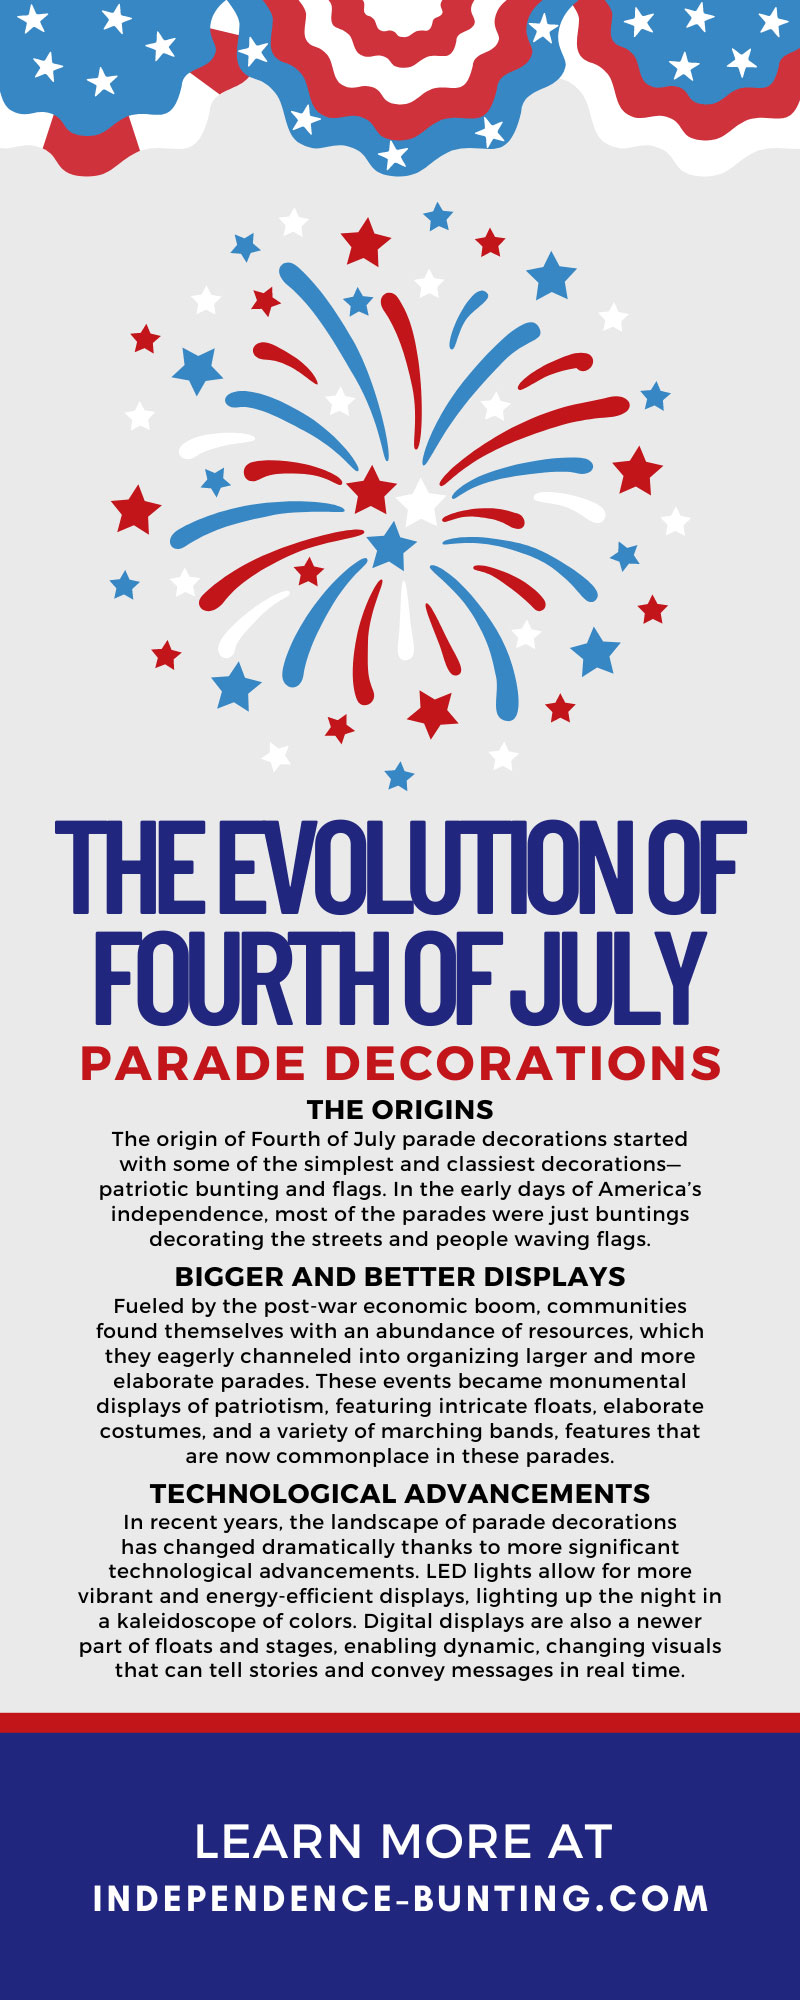 The Evolution of Fourth of July Parade Decorations